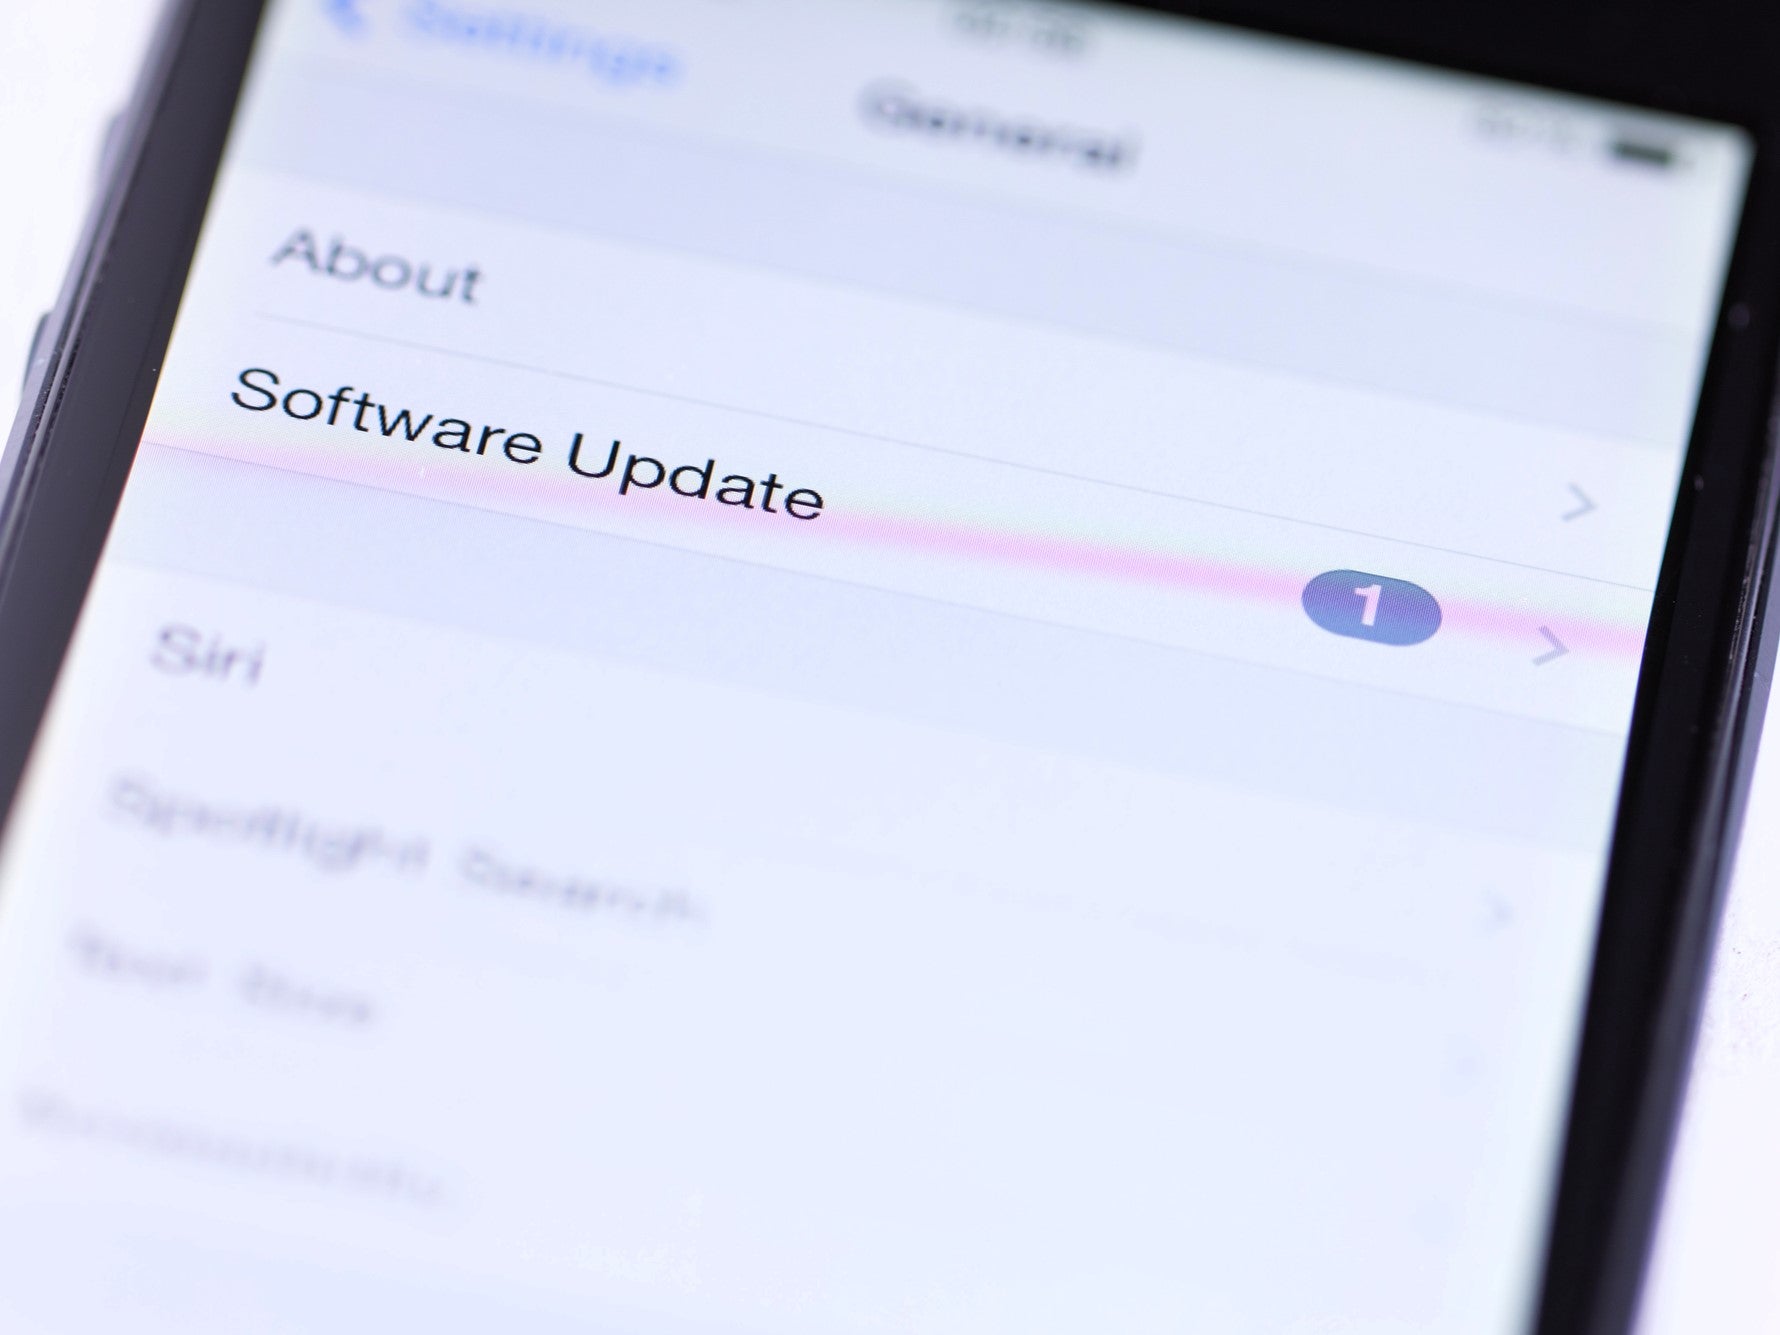 Apple urged iPhone users to update to iOS 16.5.1 in order to fix security issues